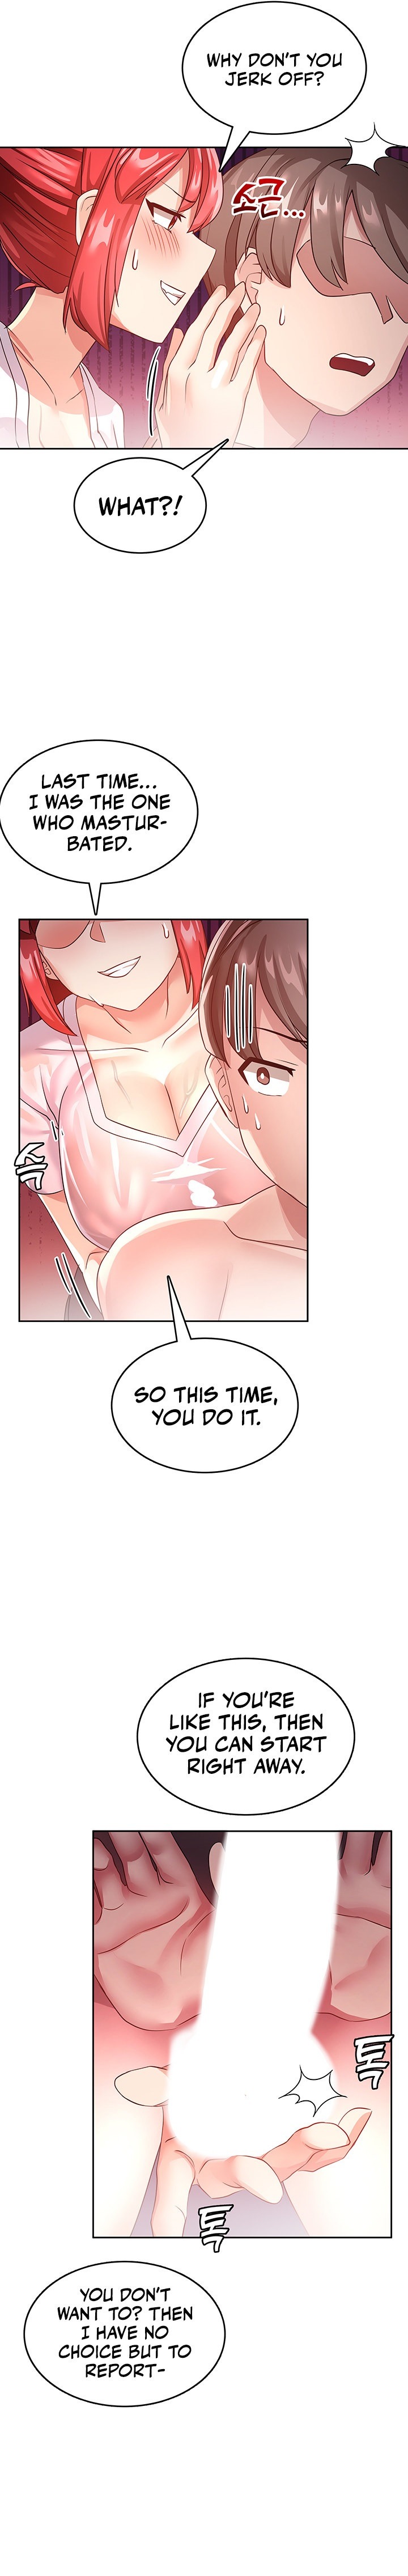 Relationship Reverse Button: Let’s Cure That Arrogant Girl - Chapter 6 Page 16